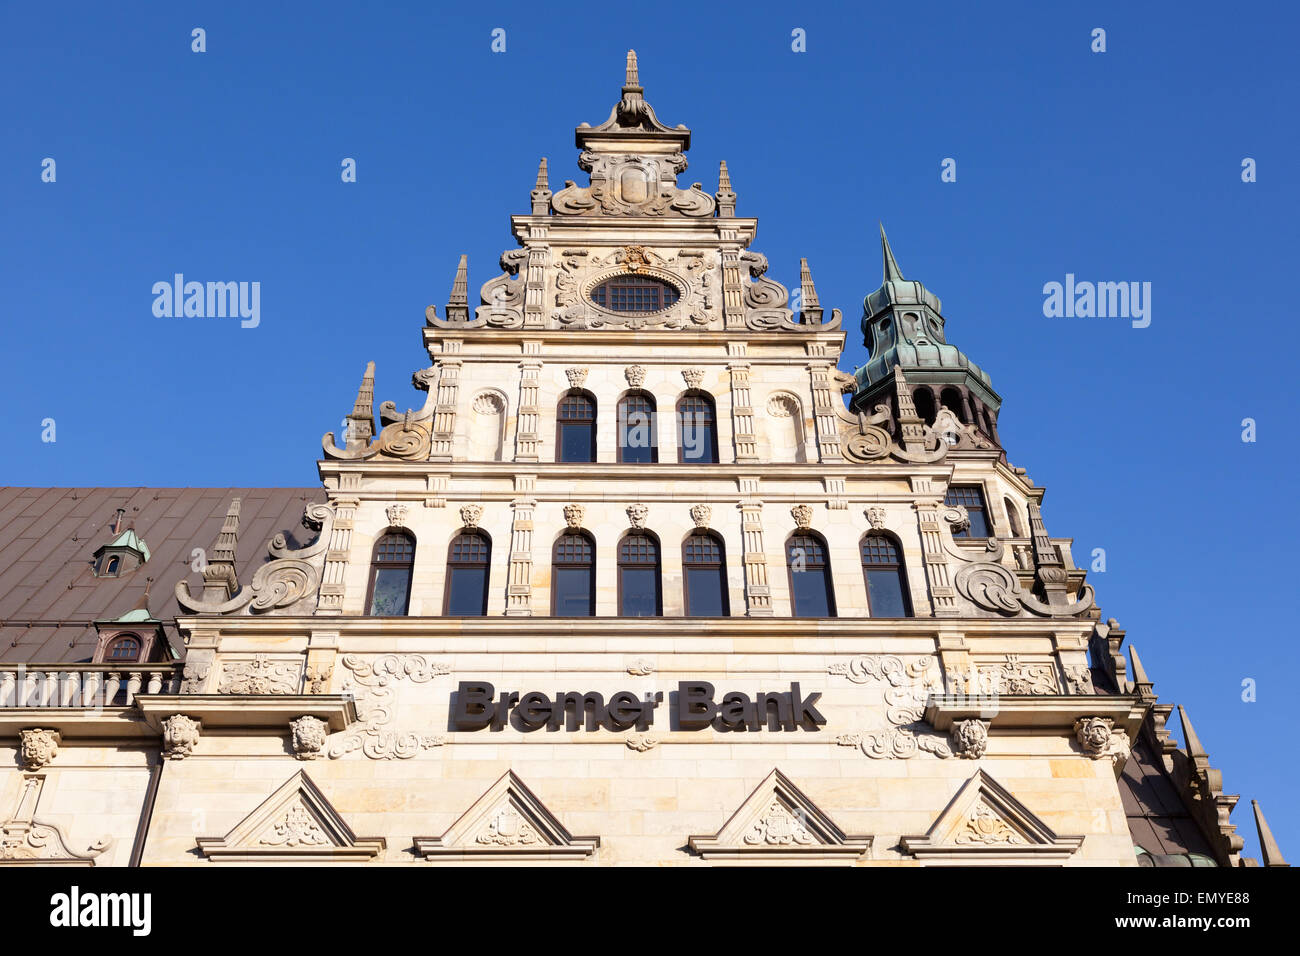 Facade of the Bremer Bank office building in the city of Bremen, Germany Stock Photo